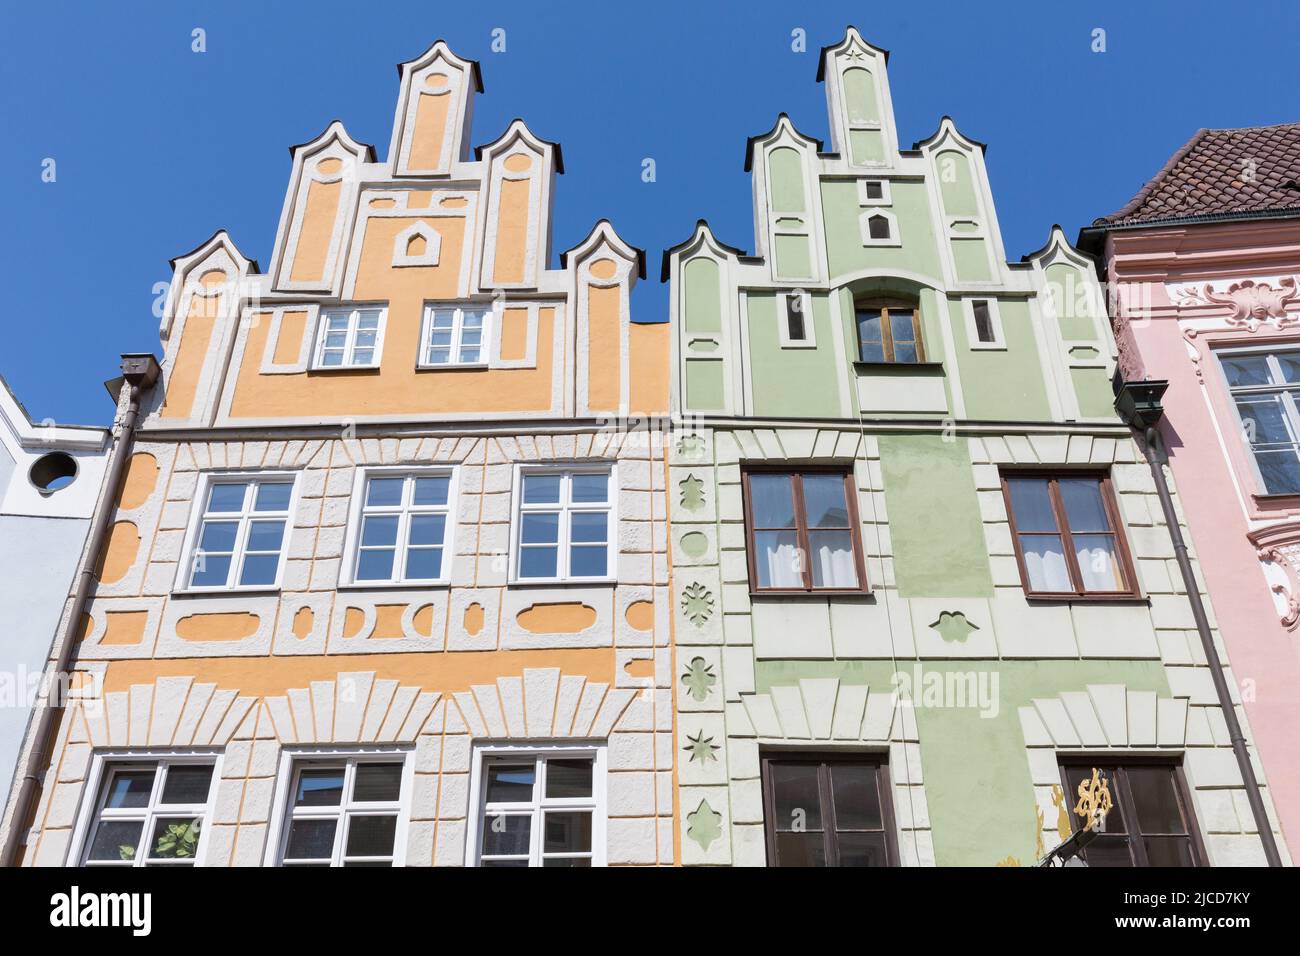 Landshut, Germany - Aug 14, 2021: Historical houses with yellow and green facade in the old town of Landshut. Stock Photo